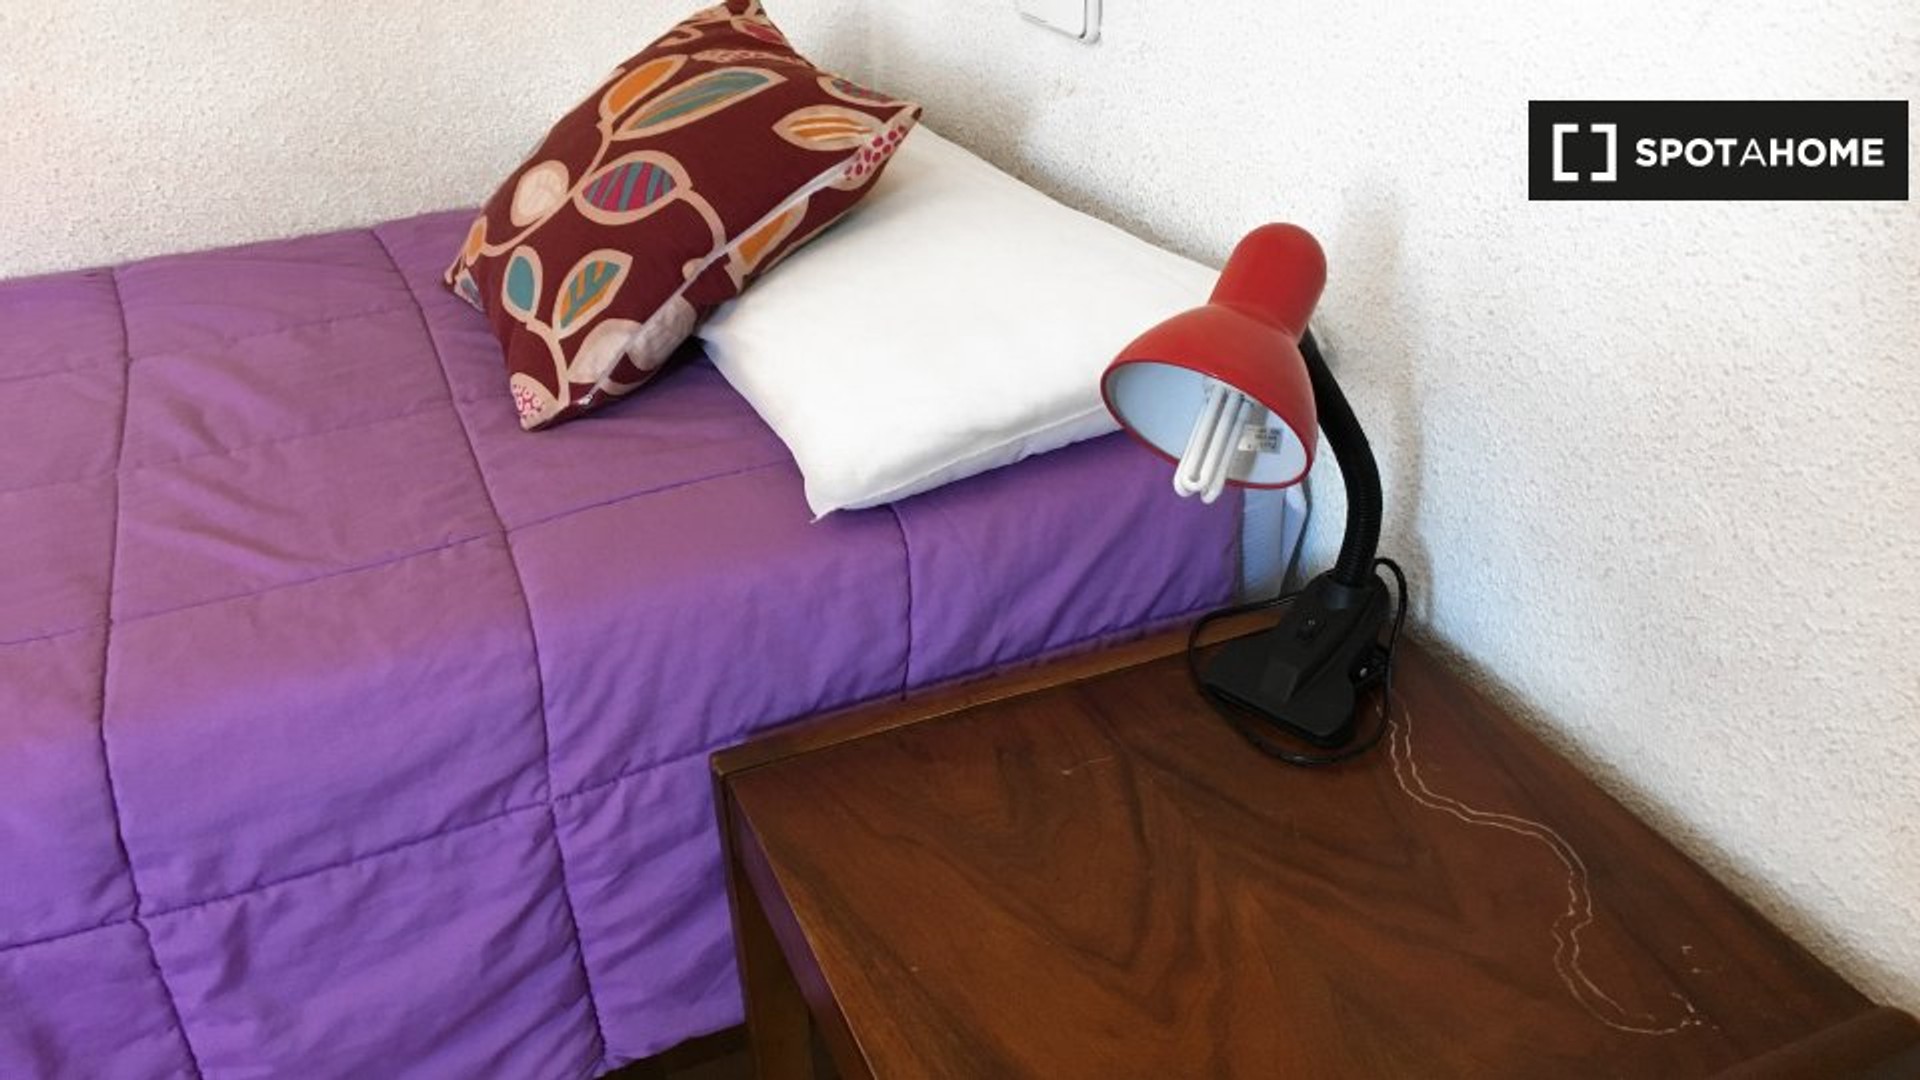 Cheap private room in Pamplona/iruña